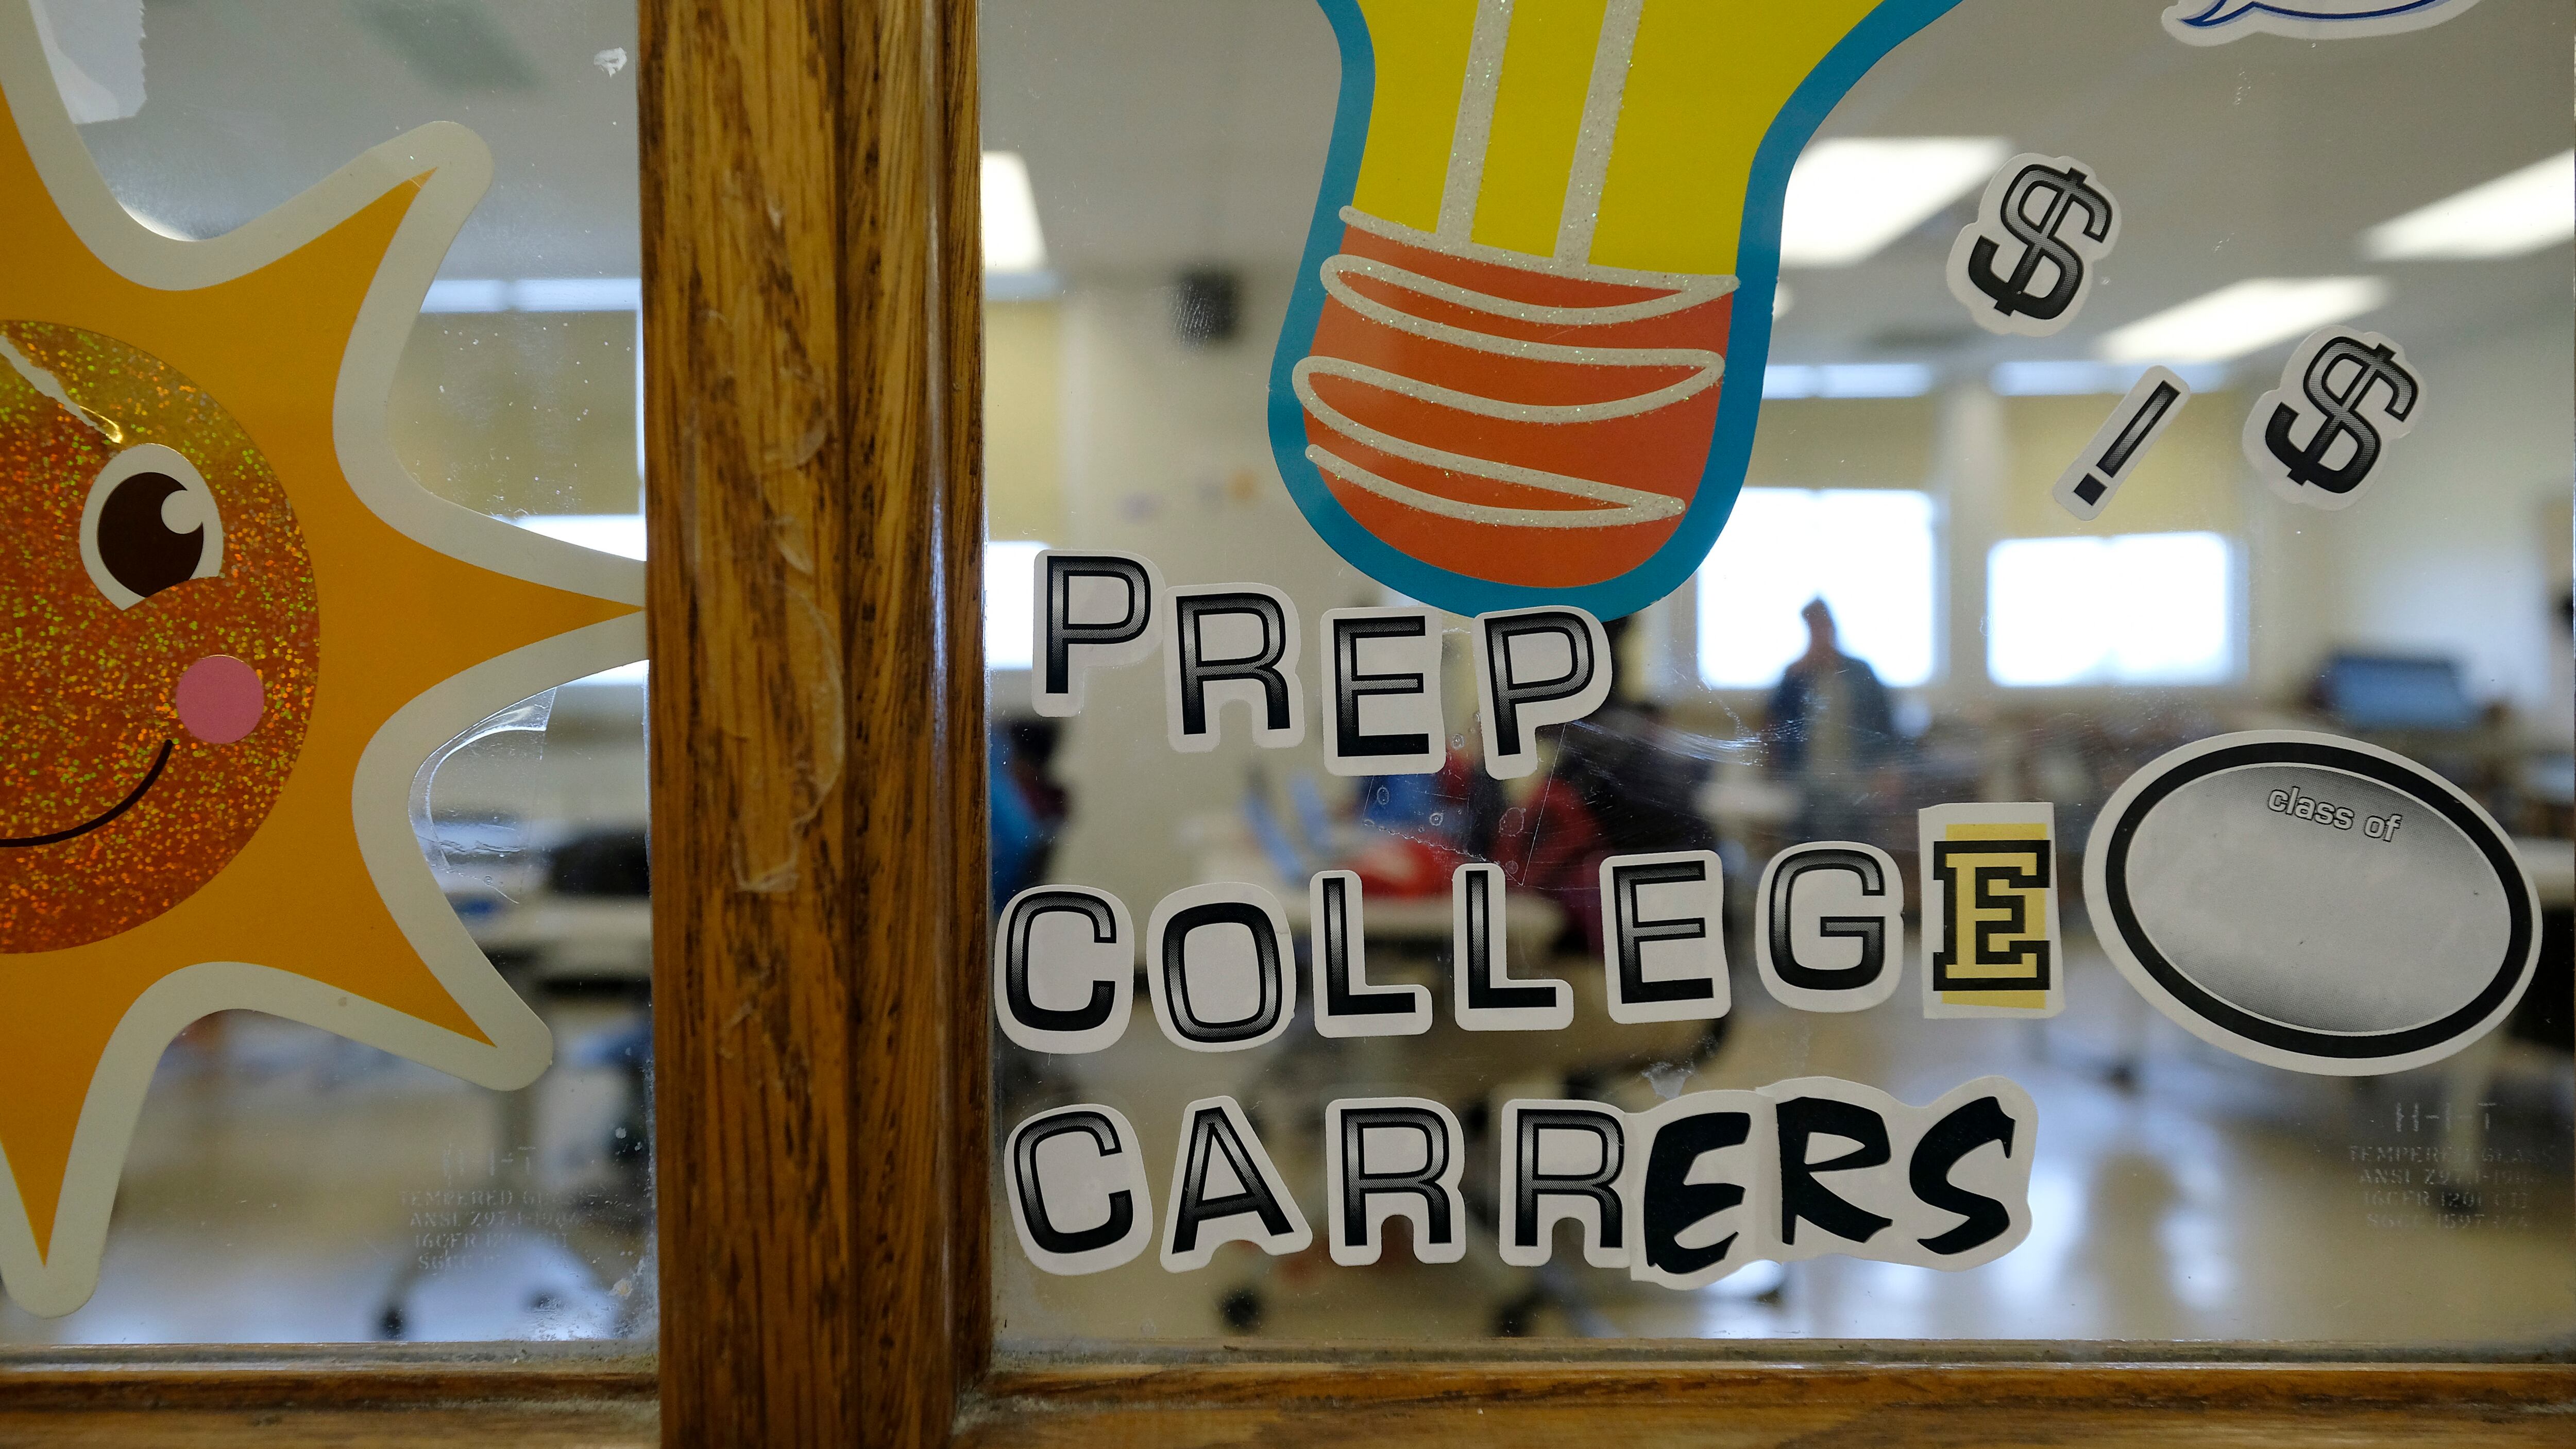 Bright letters on a window inside of a school spell "Prep College Careers" along with a drawing of a smiling sun and a lightbulb.